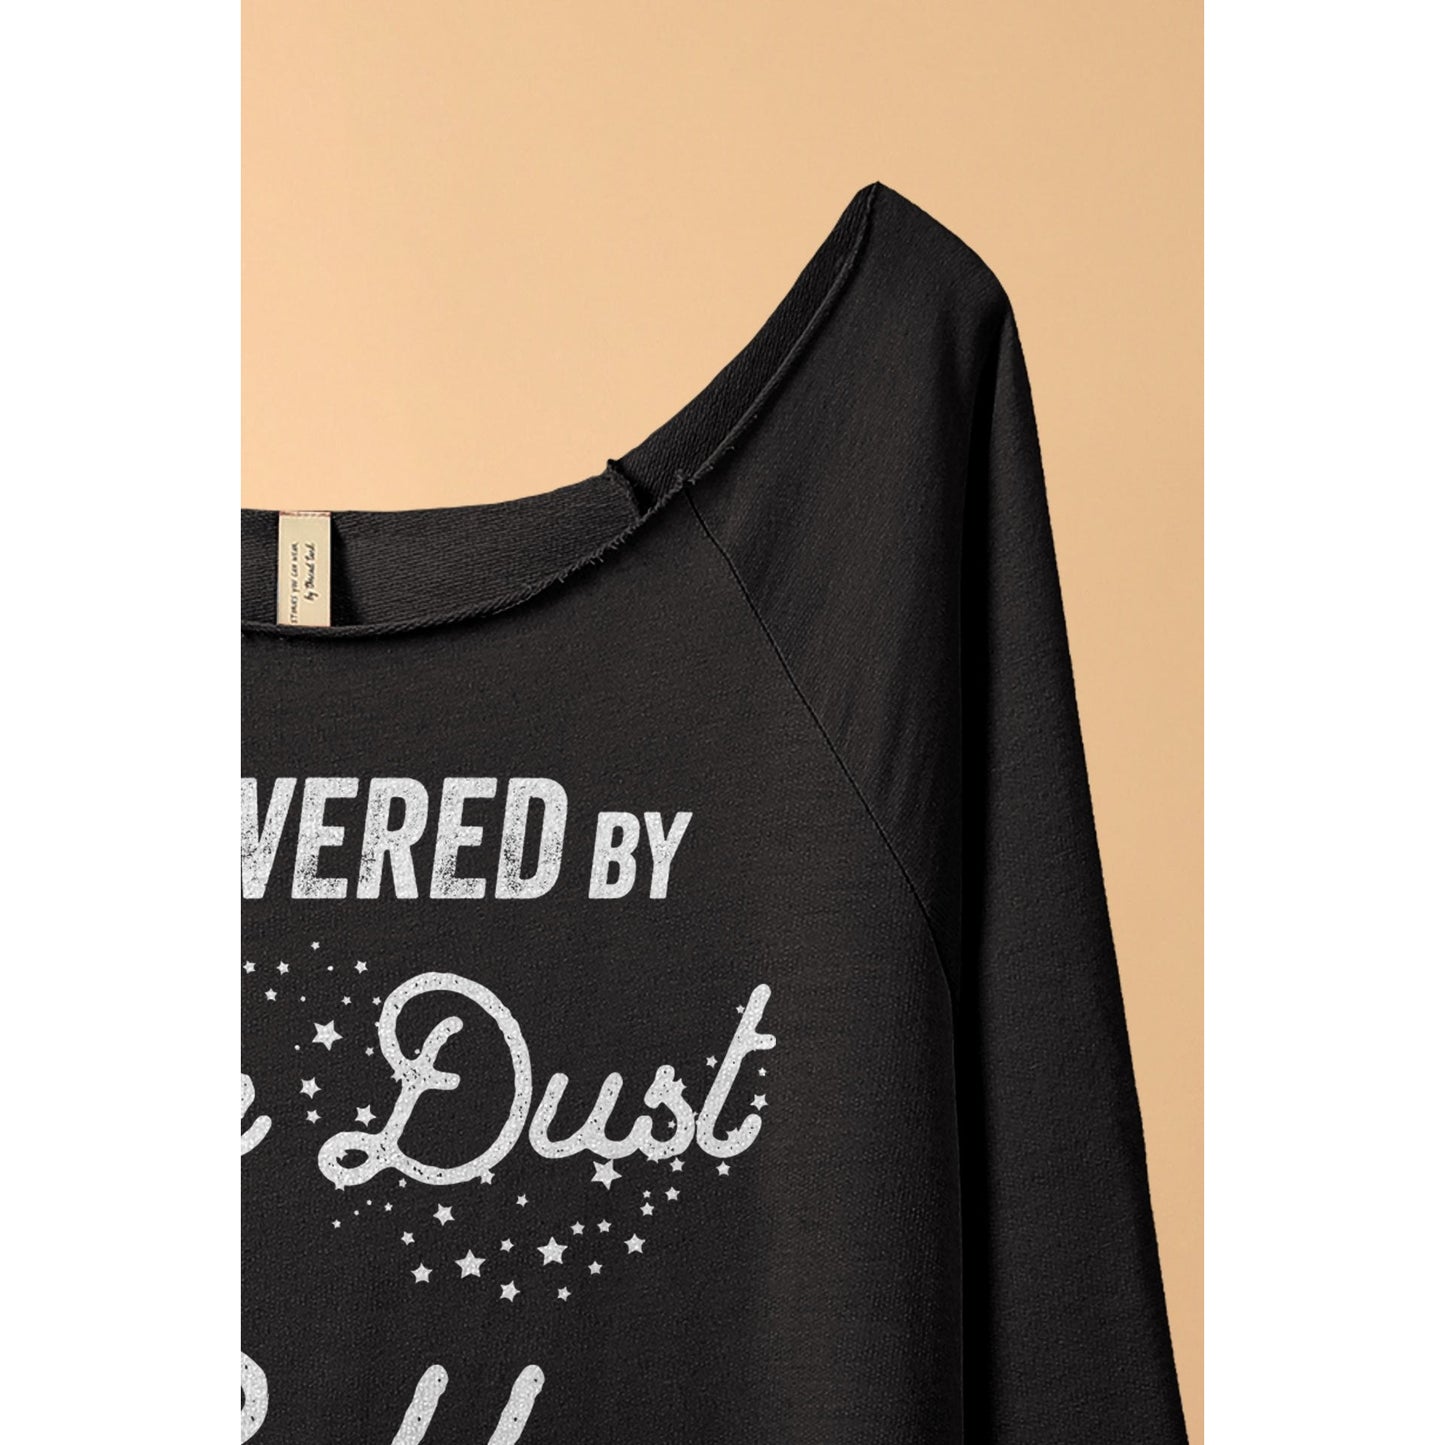 Powered By Pixie Dust And Coffee - threadtank | stories you can wear